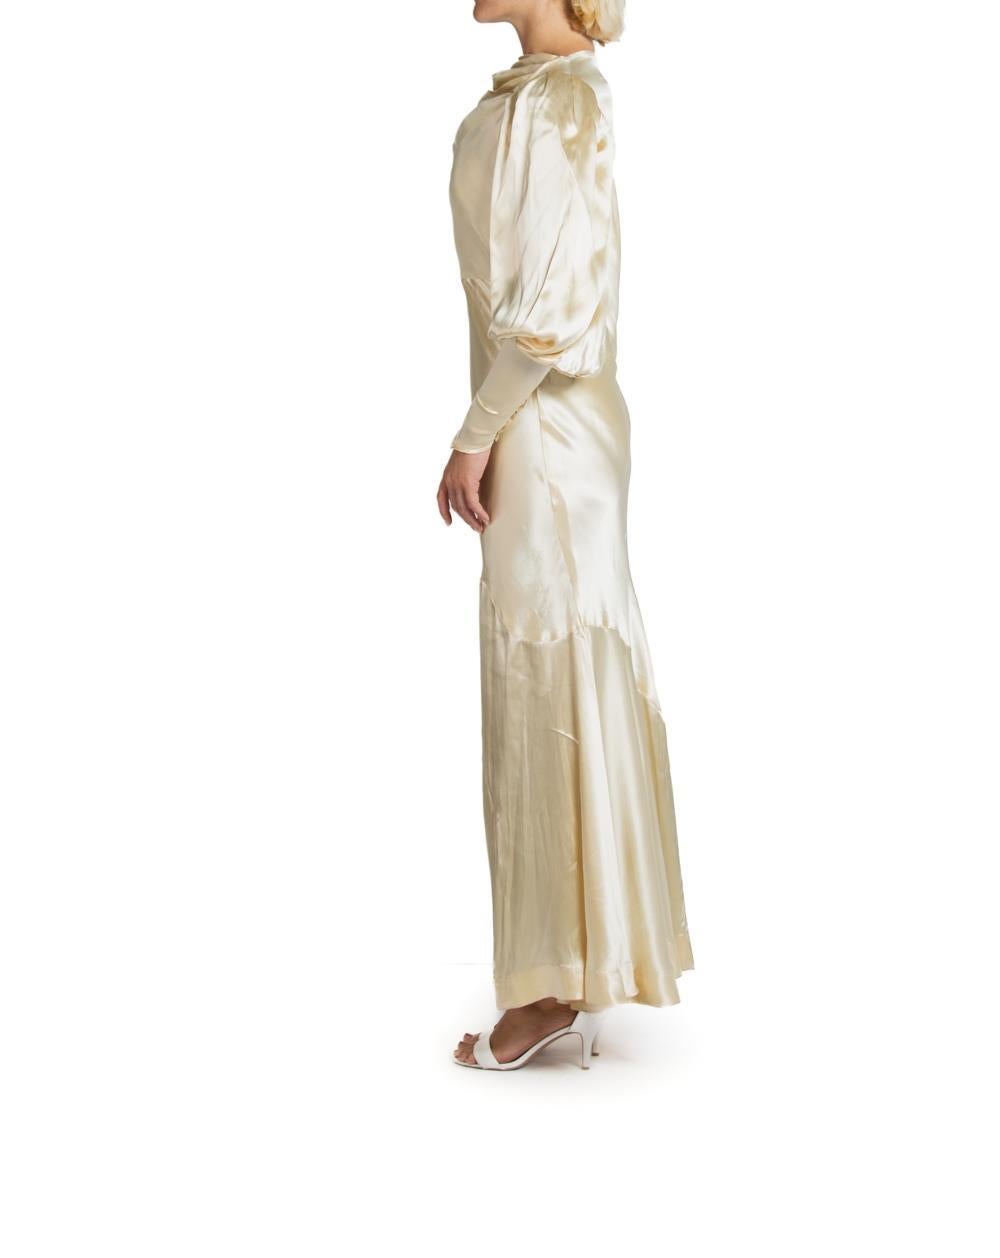 1930S Cream Silk Satin Billowy Sleeve With Belt Wedding Gown In Excellent Condition For Sale In New York, NY